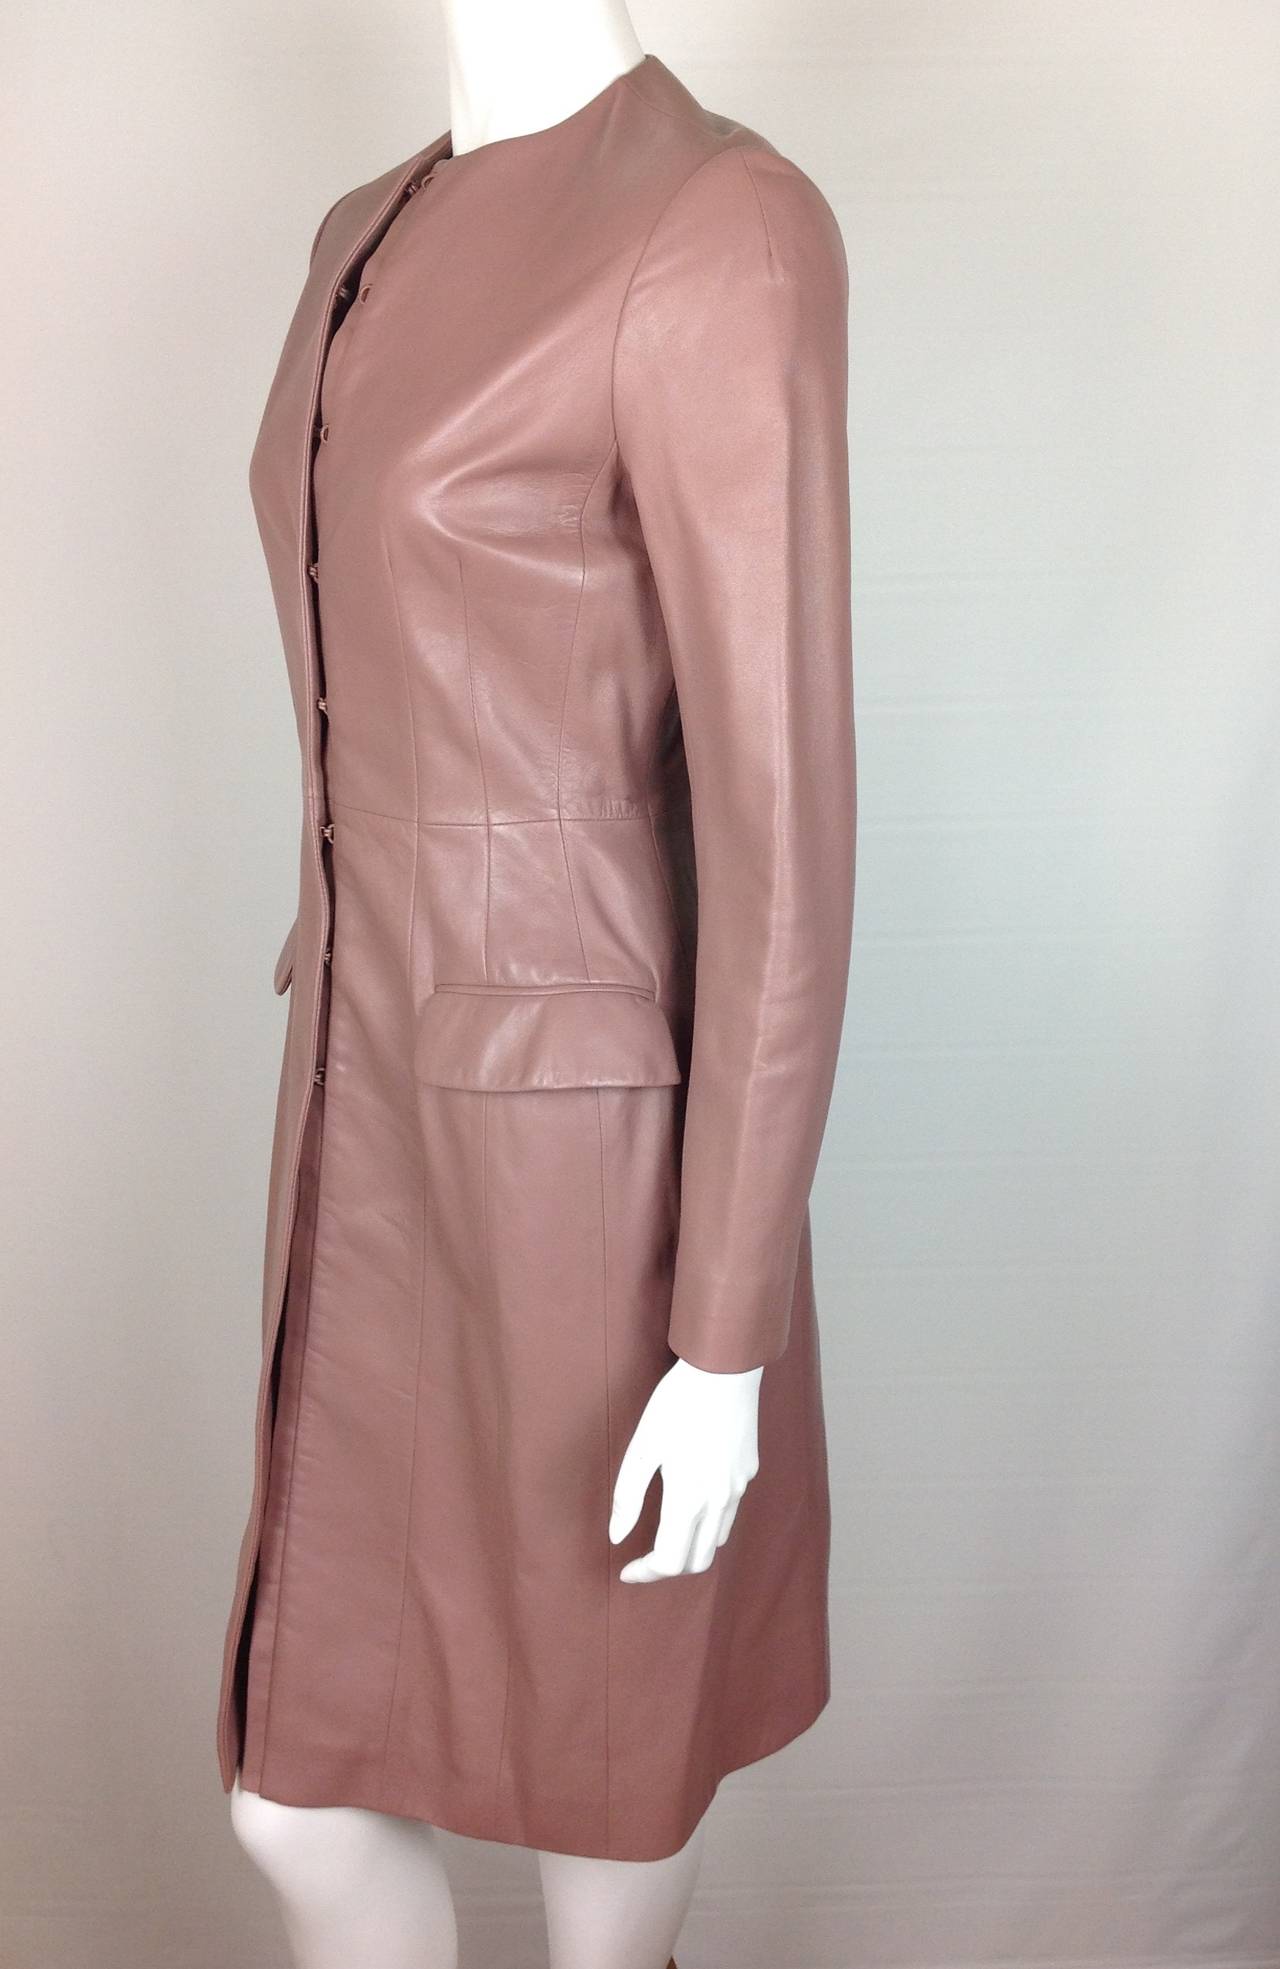 Women's Mauve Christian Dior leather fitted coat dress              Size 4